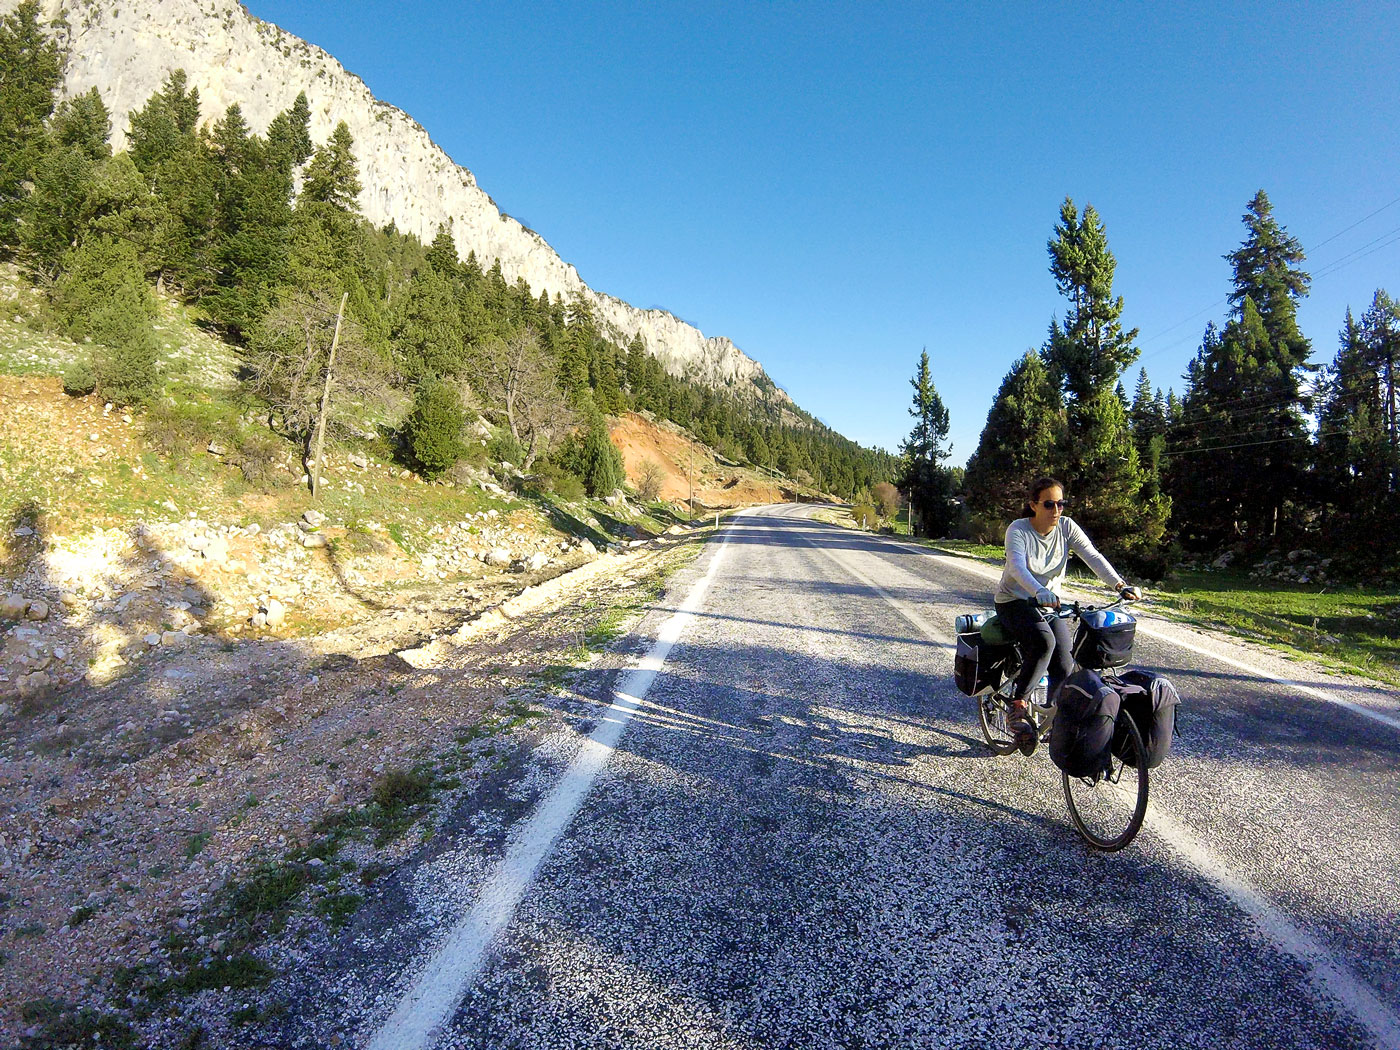 Cycling Turkey, Yas on the road to the Taurus Mountains. Cycling Turquey, Yas on the road of the Taurus mountains.